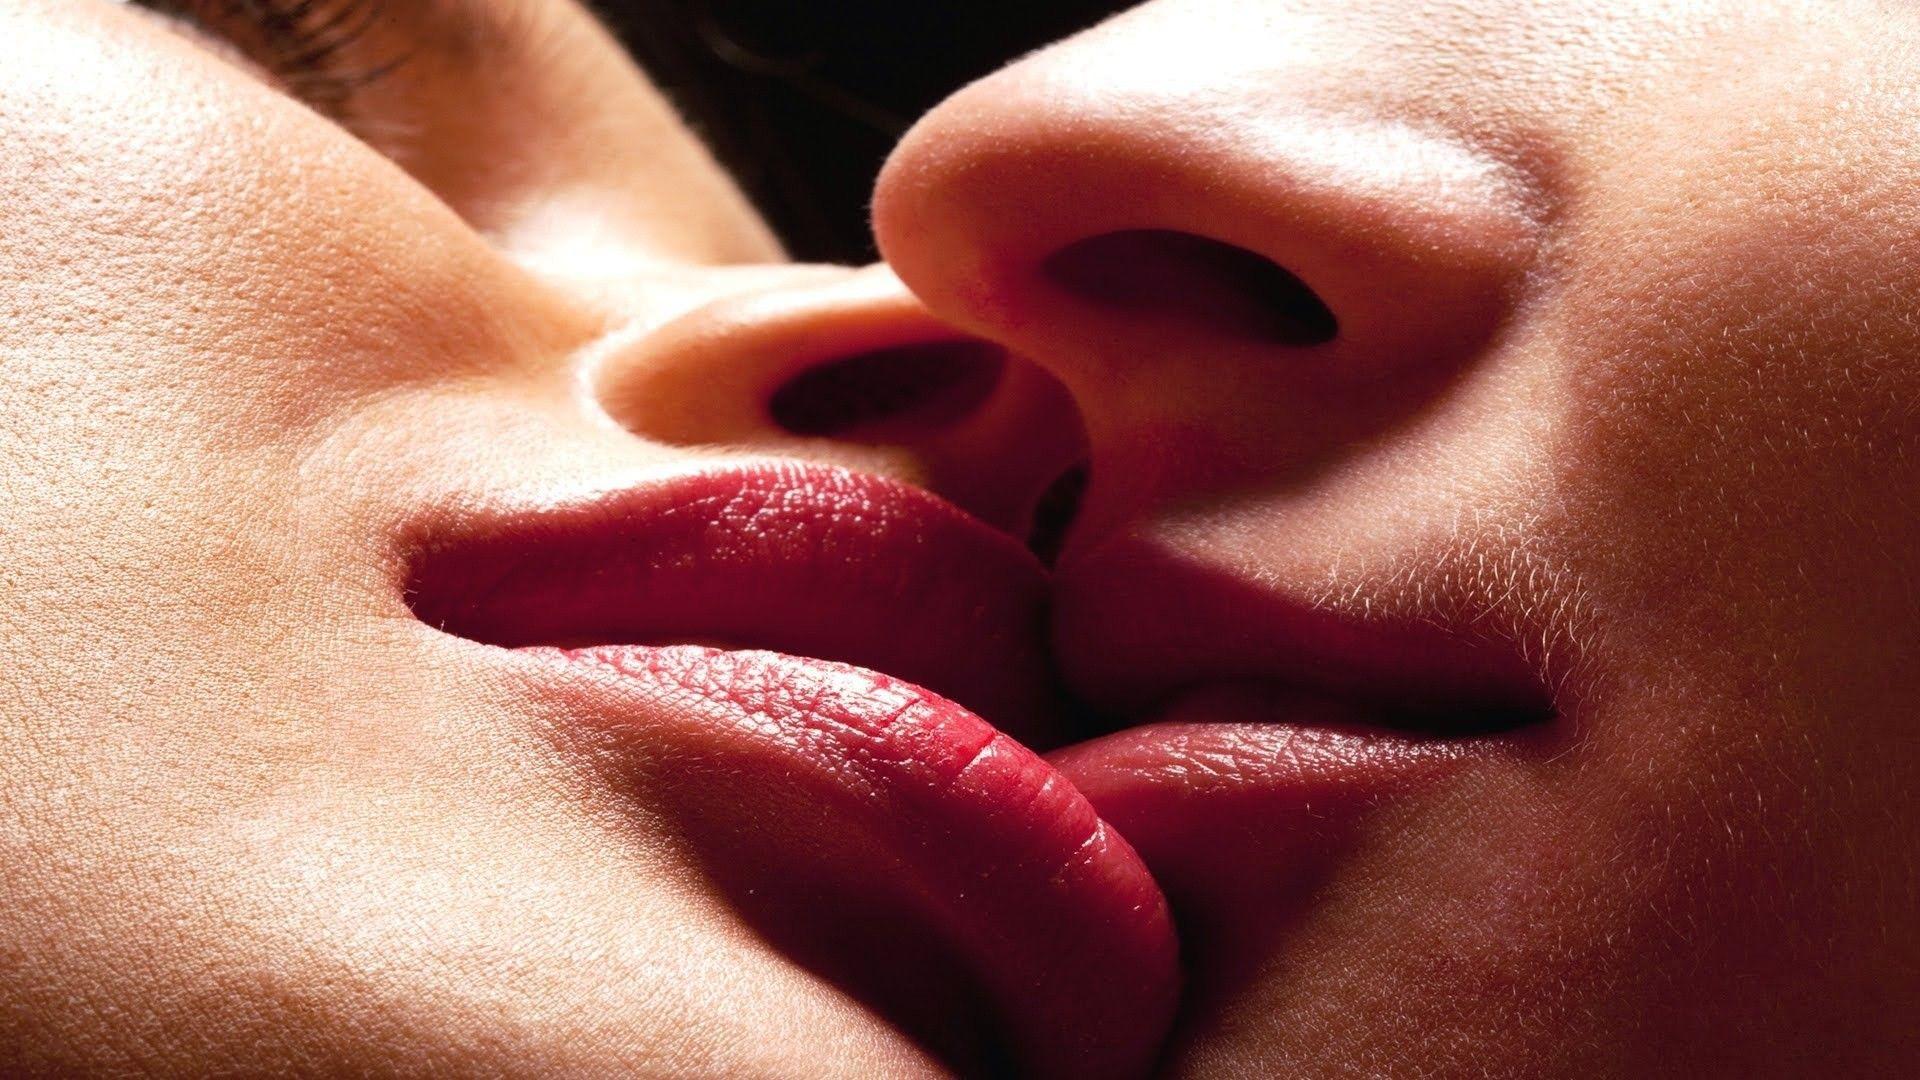 Lover Lips Kissing Photo. Beautiful image HD Picture & Desktop